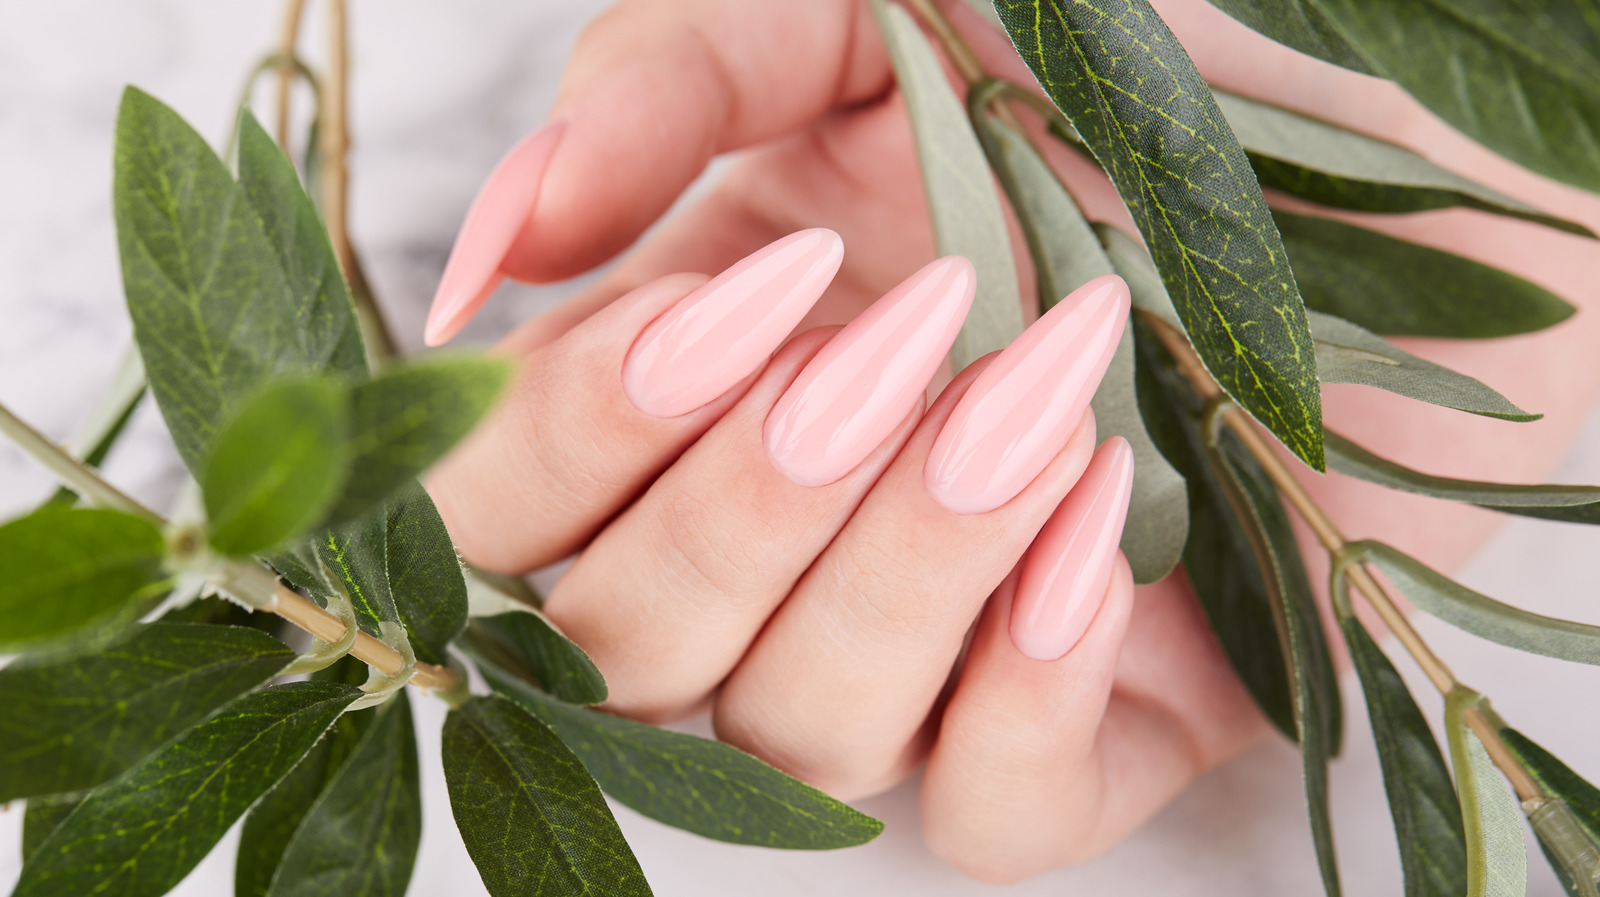 How To Revive Your Nails After A Bad Gel Manicure